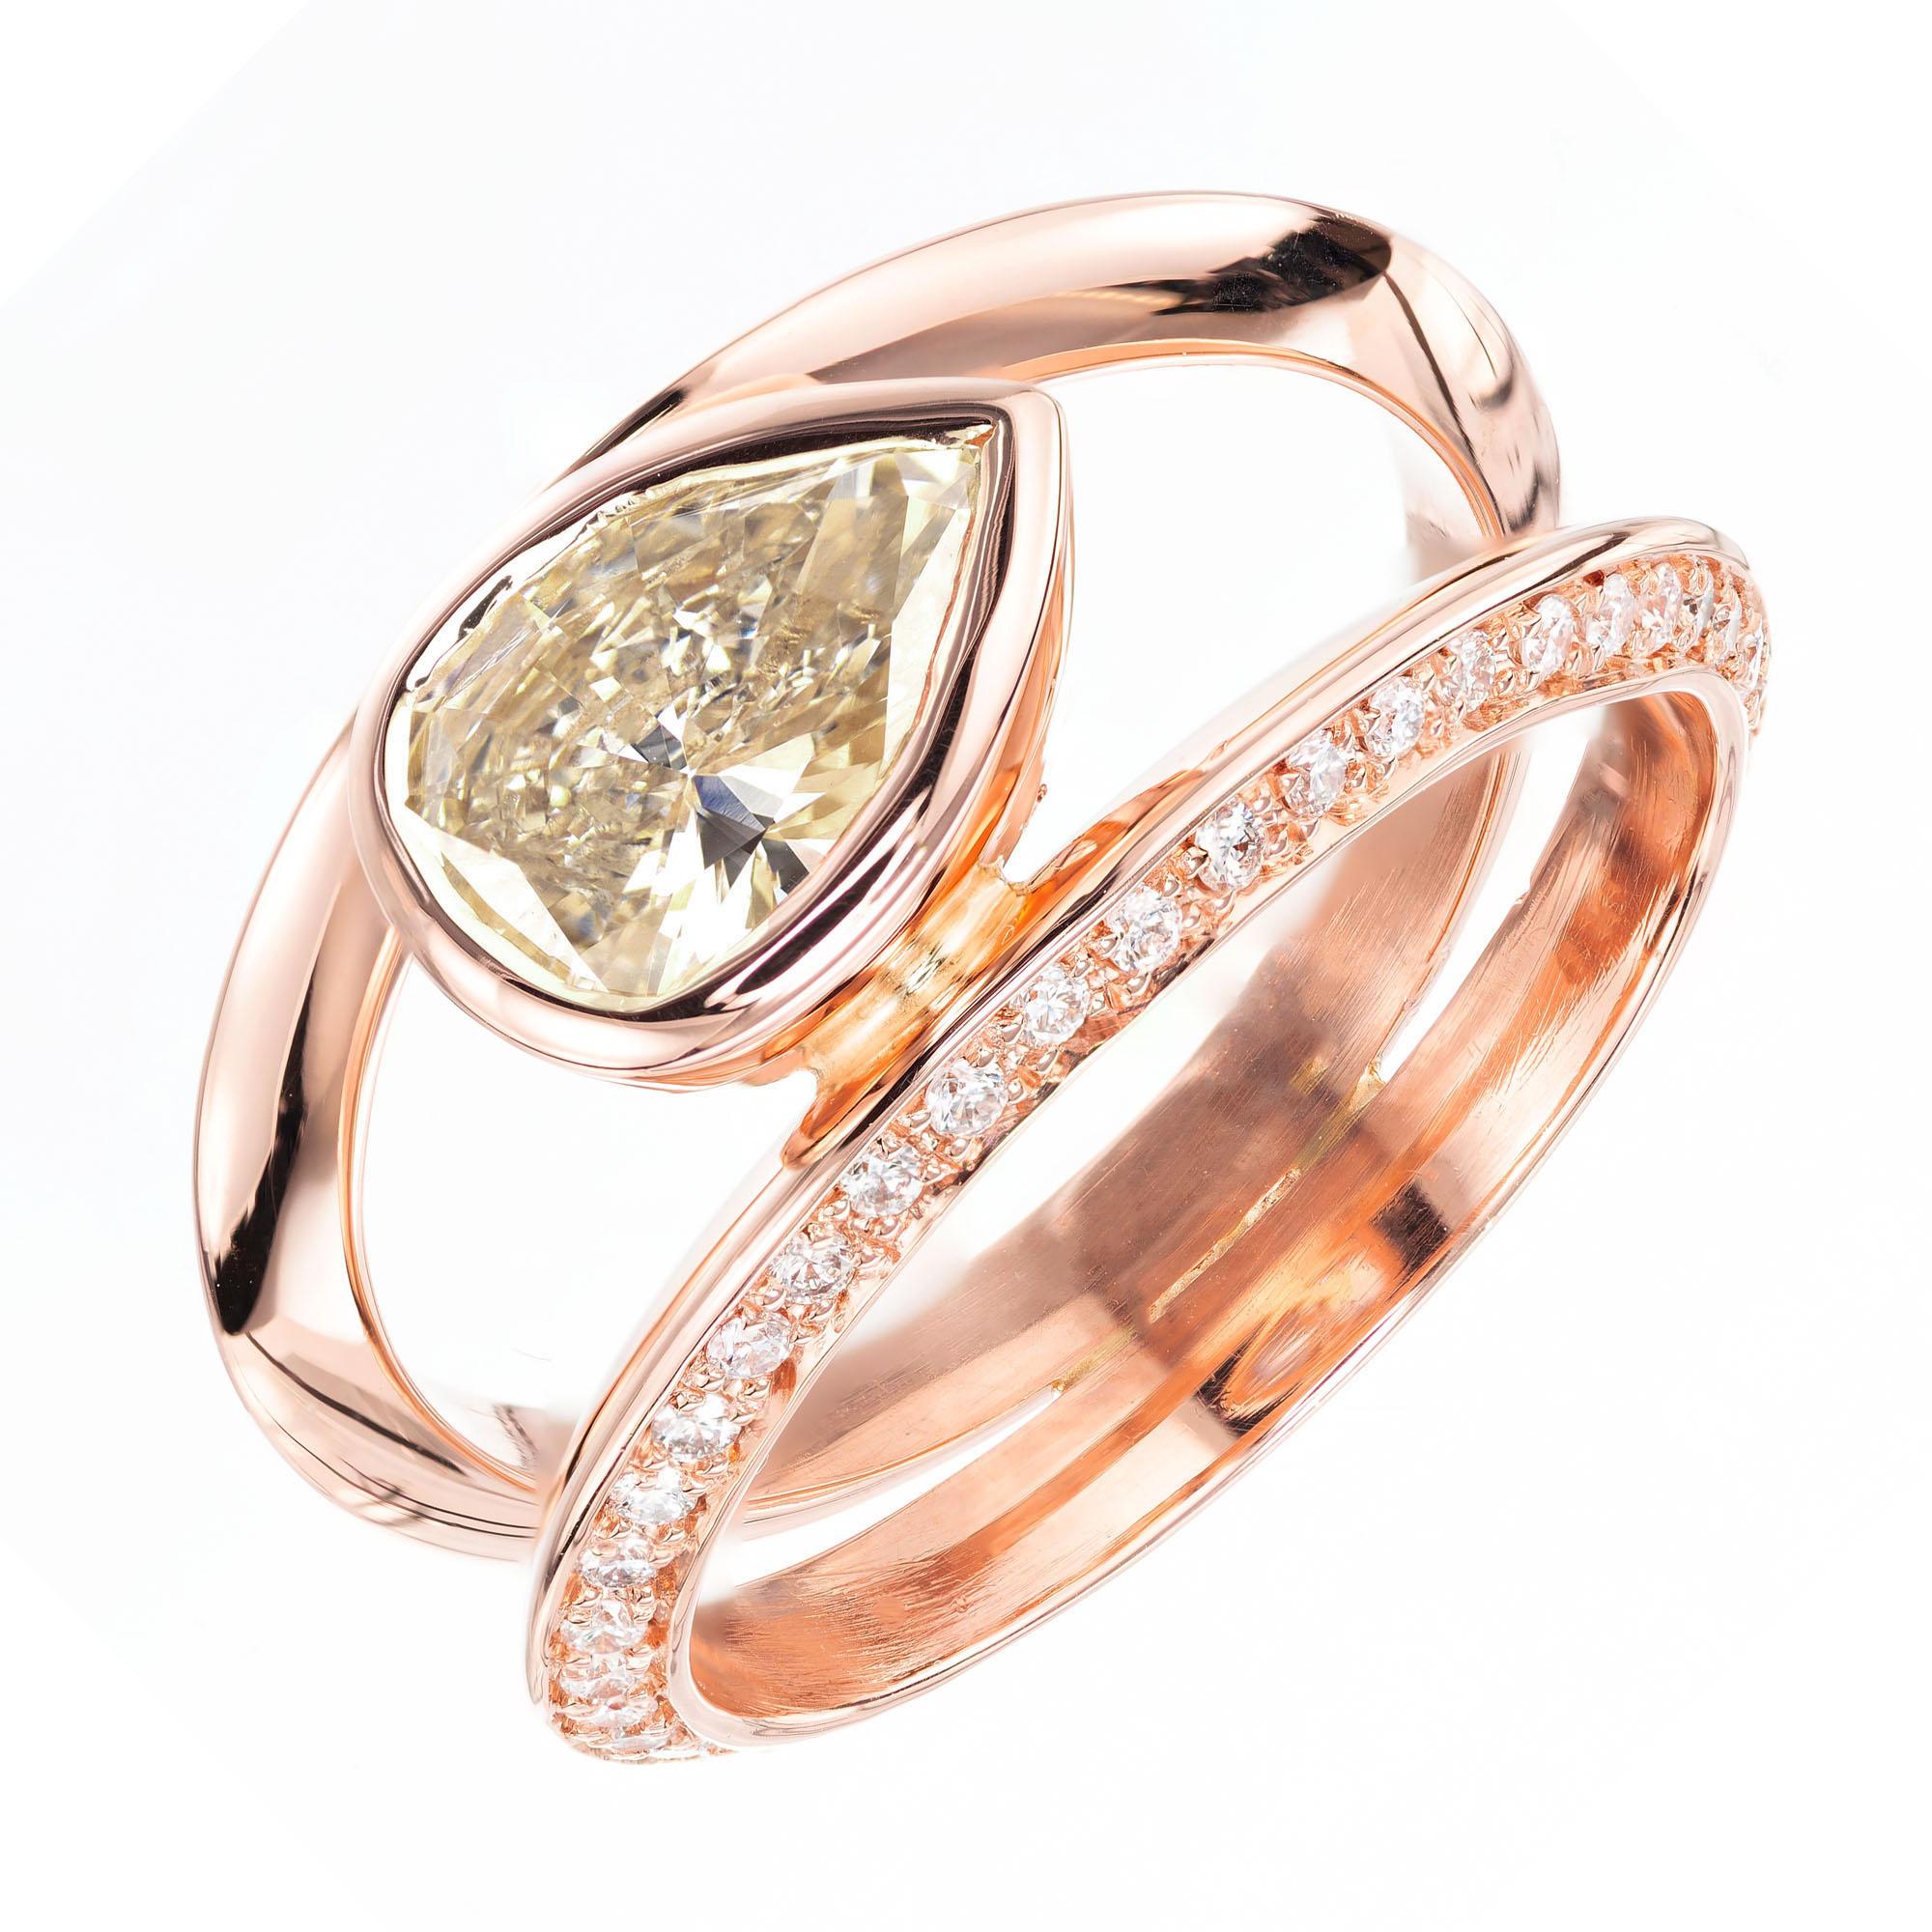 Pear shaped light brown diamond set sideways (East to West) modern alternative split shank engagement ring, with 72 pave set round full cut diamonds in a 14k rose gold setting, created in the Peter Suchy Workshop. 

1 pear shaped light brown